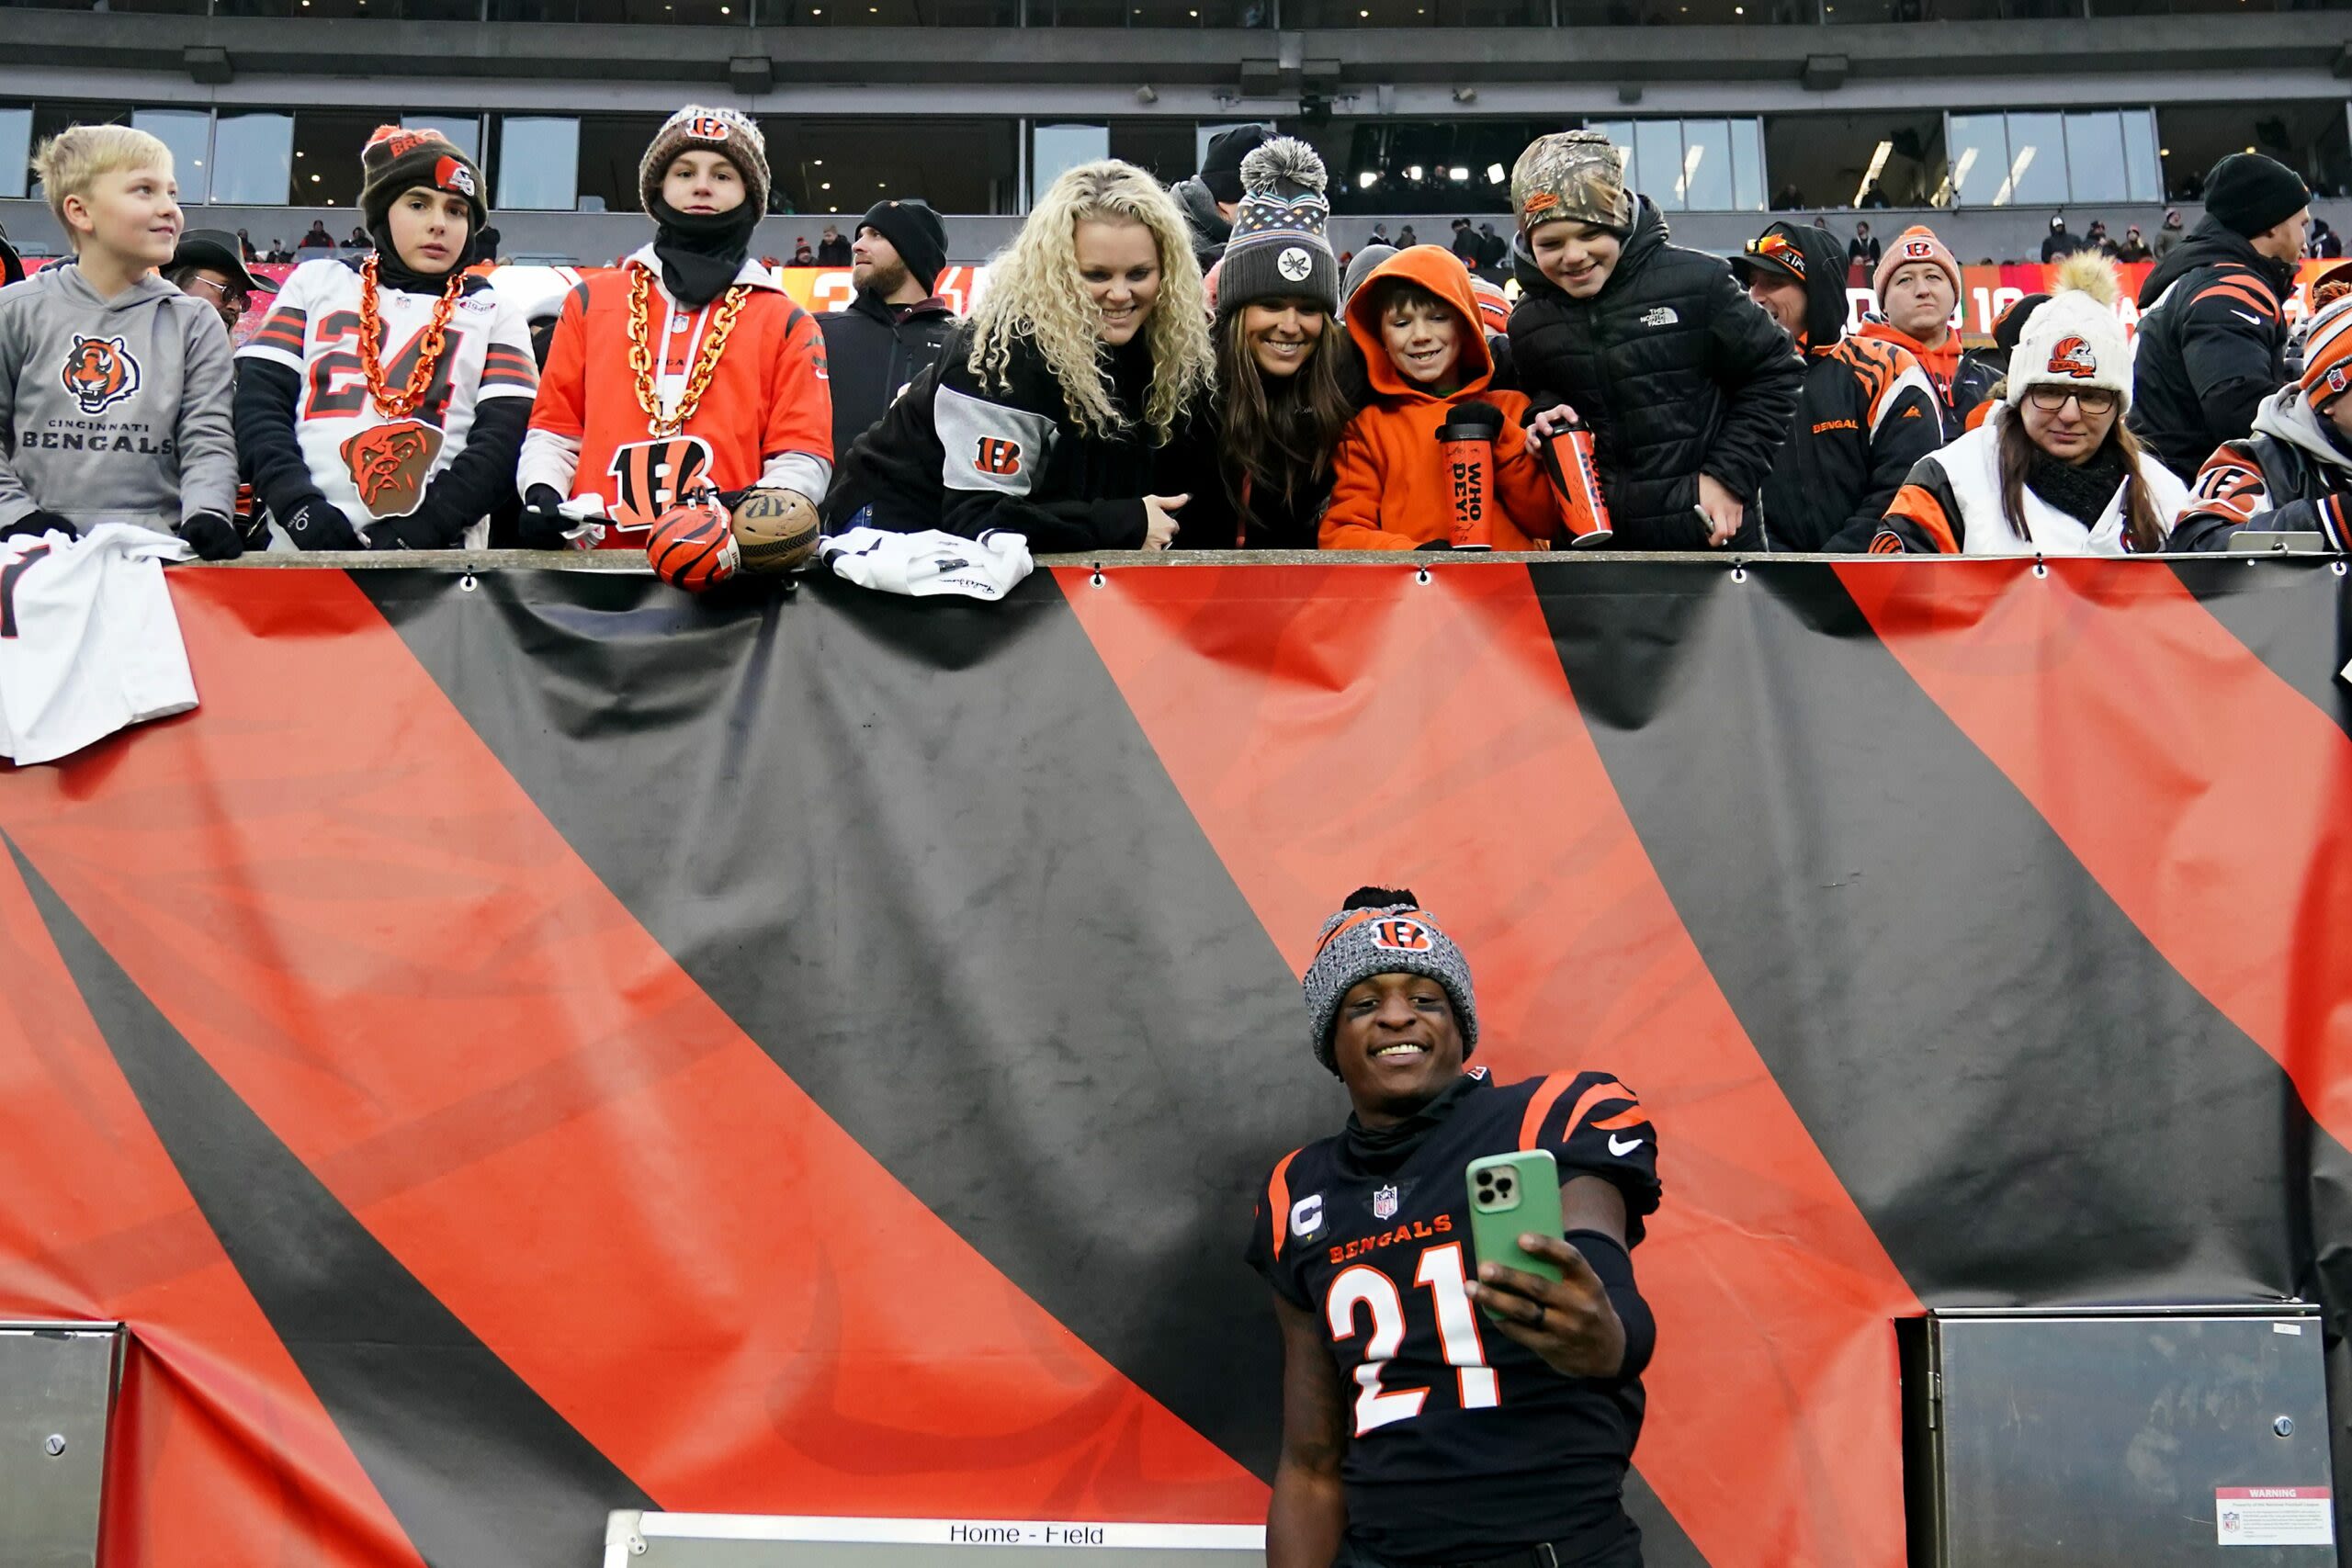 Where do Bengals rank among 32 teams in Twitter followers?